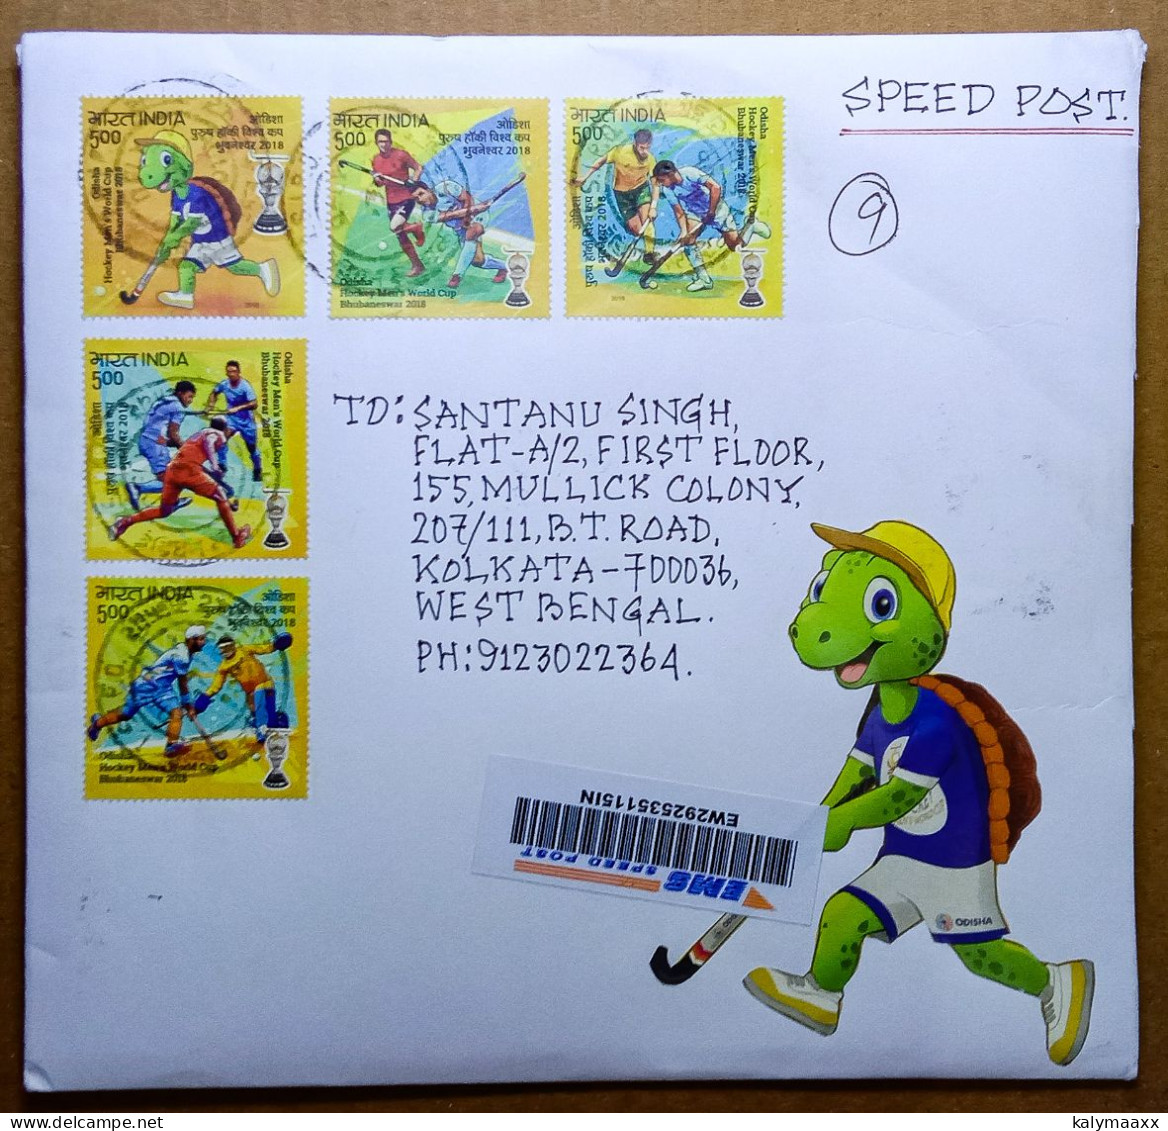 INDIA EMS SPEED POST COVER WITH HOCKEY STAMPS ATTACHED, HOCKEY, FIELD HOCKEY, COMMERCIALLY USED - Hockey (Field)